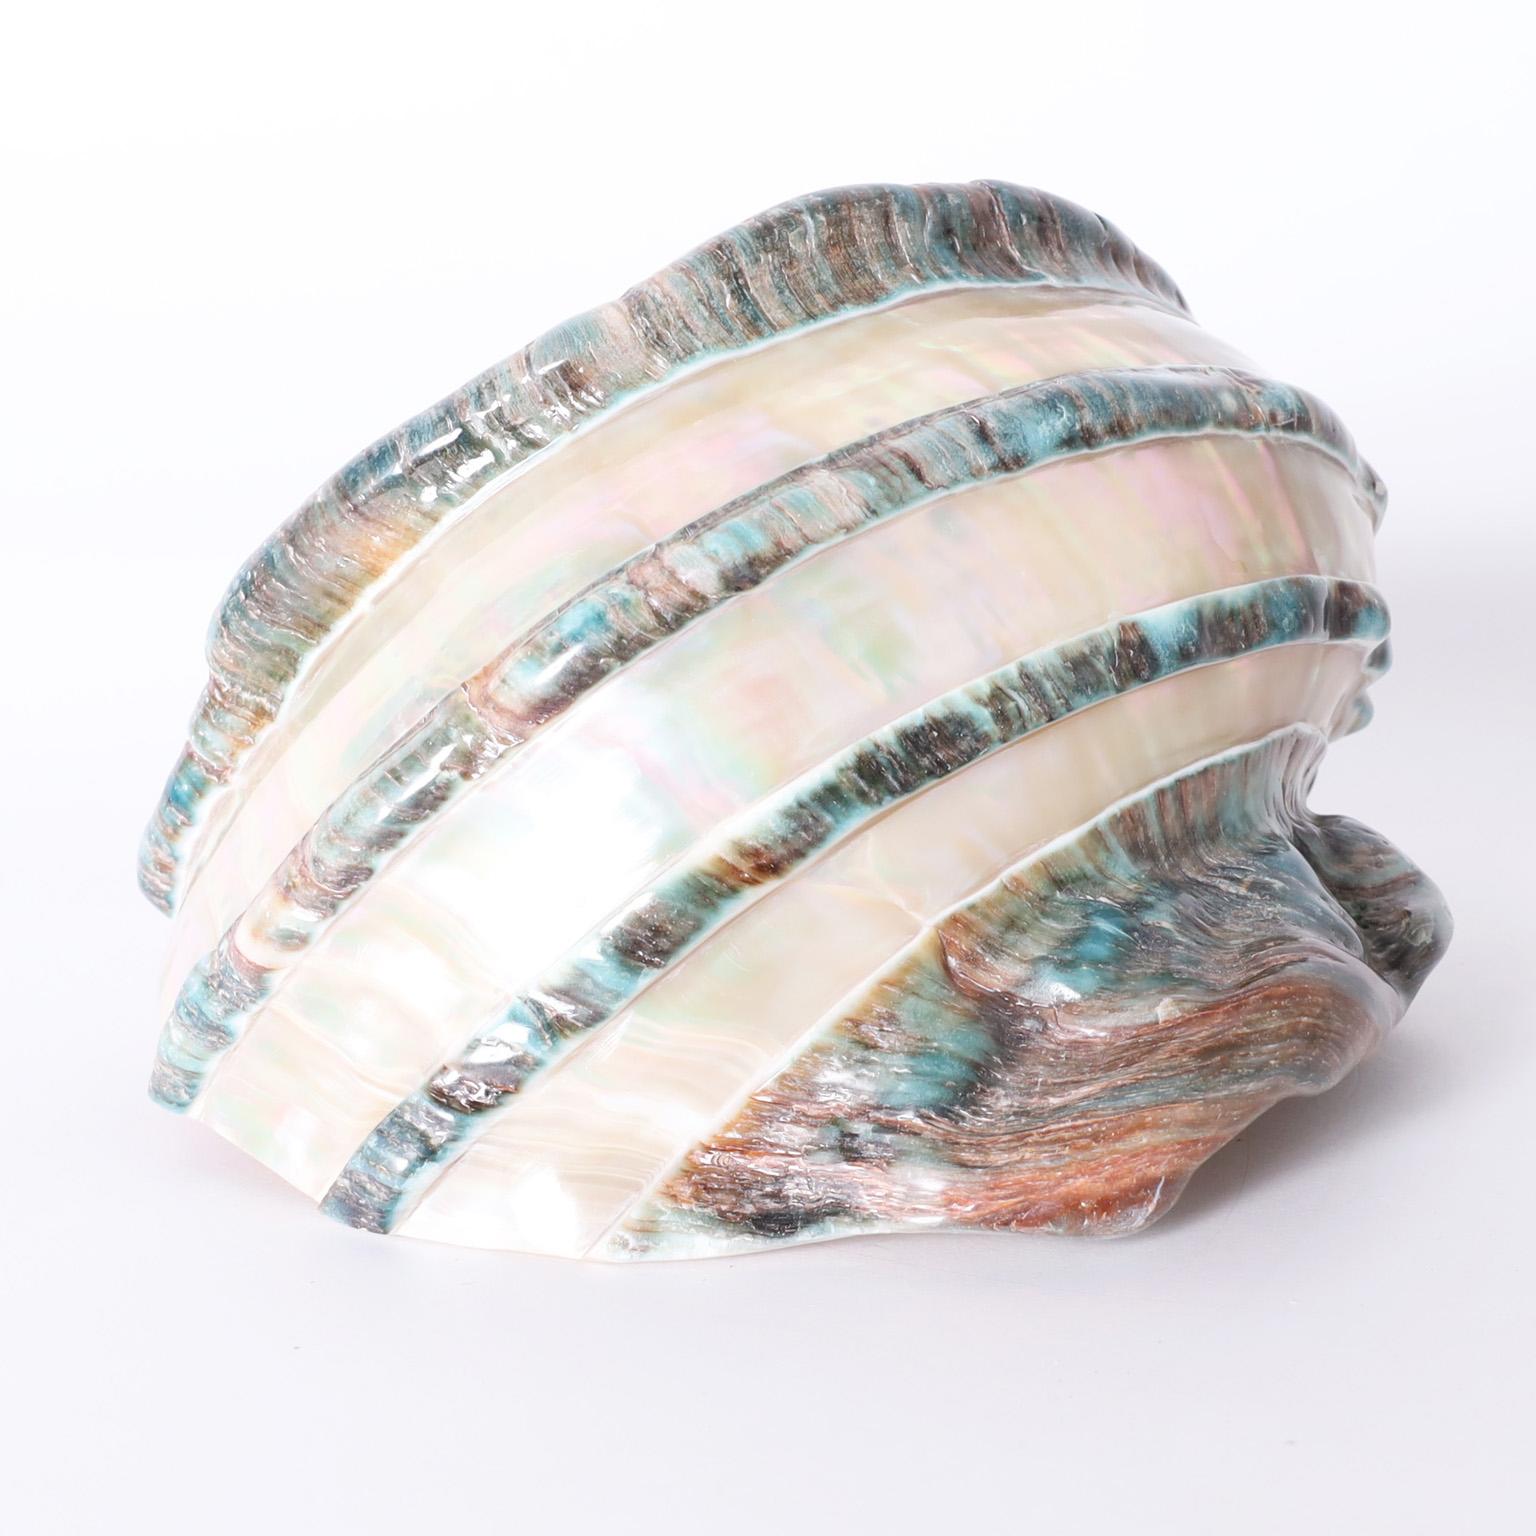 Giant Banded Turbo Shells, Priced Individually For Sale 1